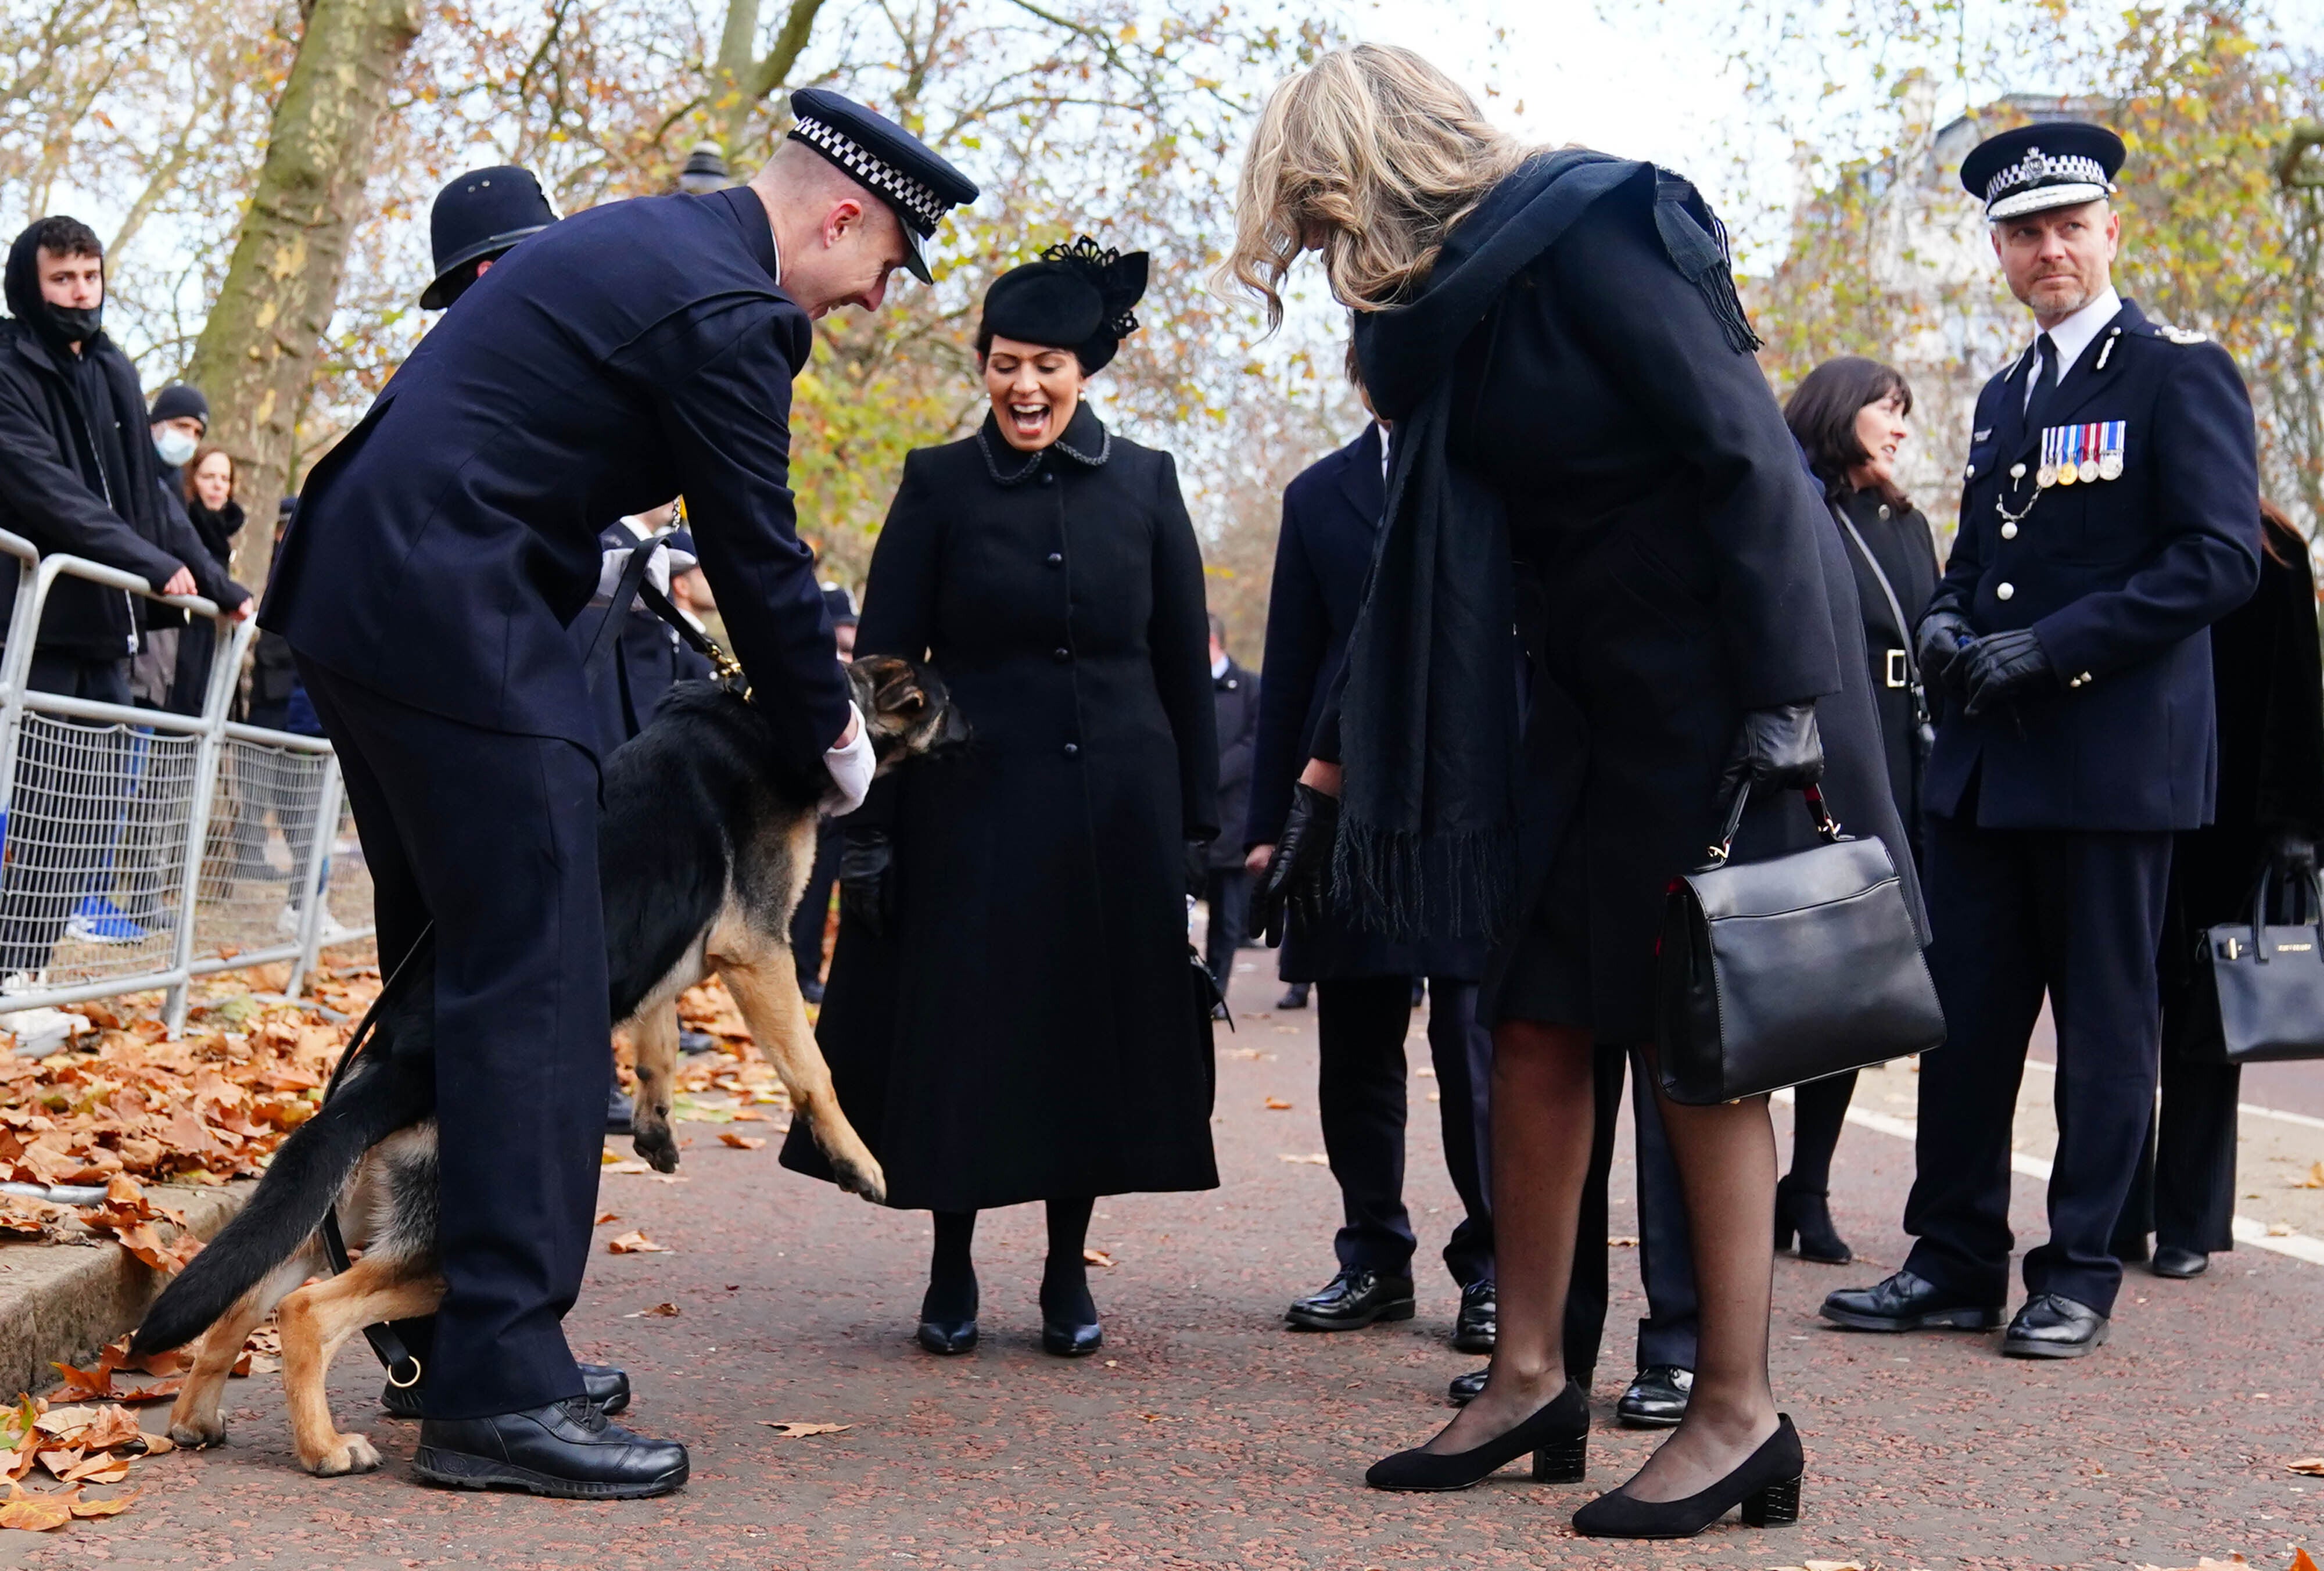 Sgt Ratana’s partner Su Bushby (centre right) meets a police dog that she named outside the chapel (Victoria Jones/PA)